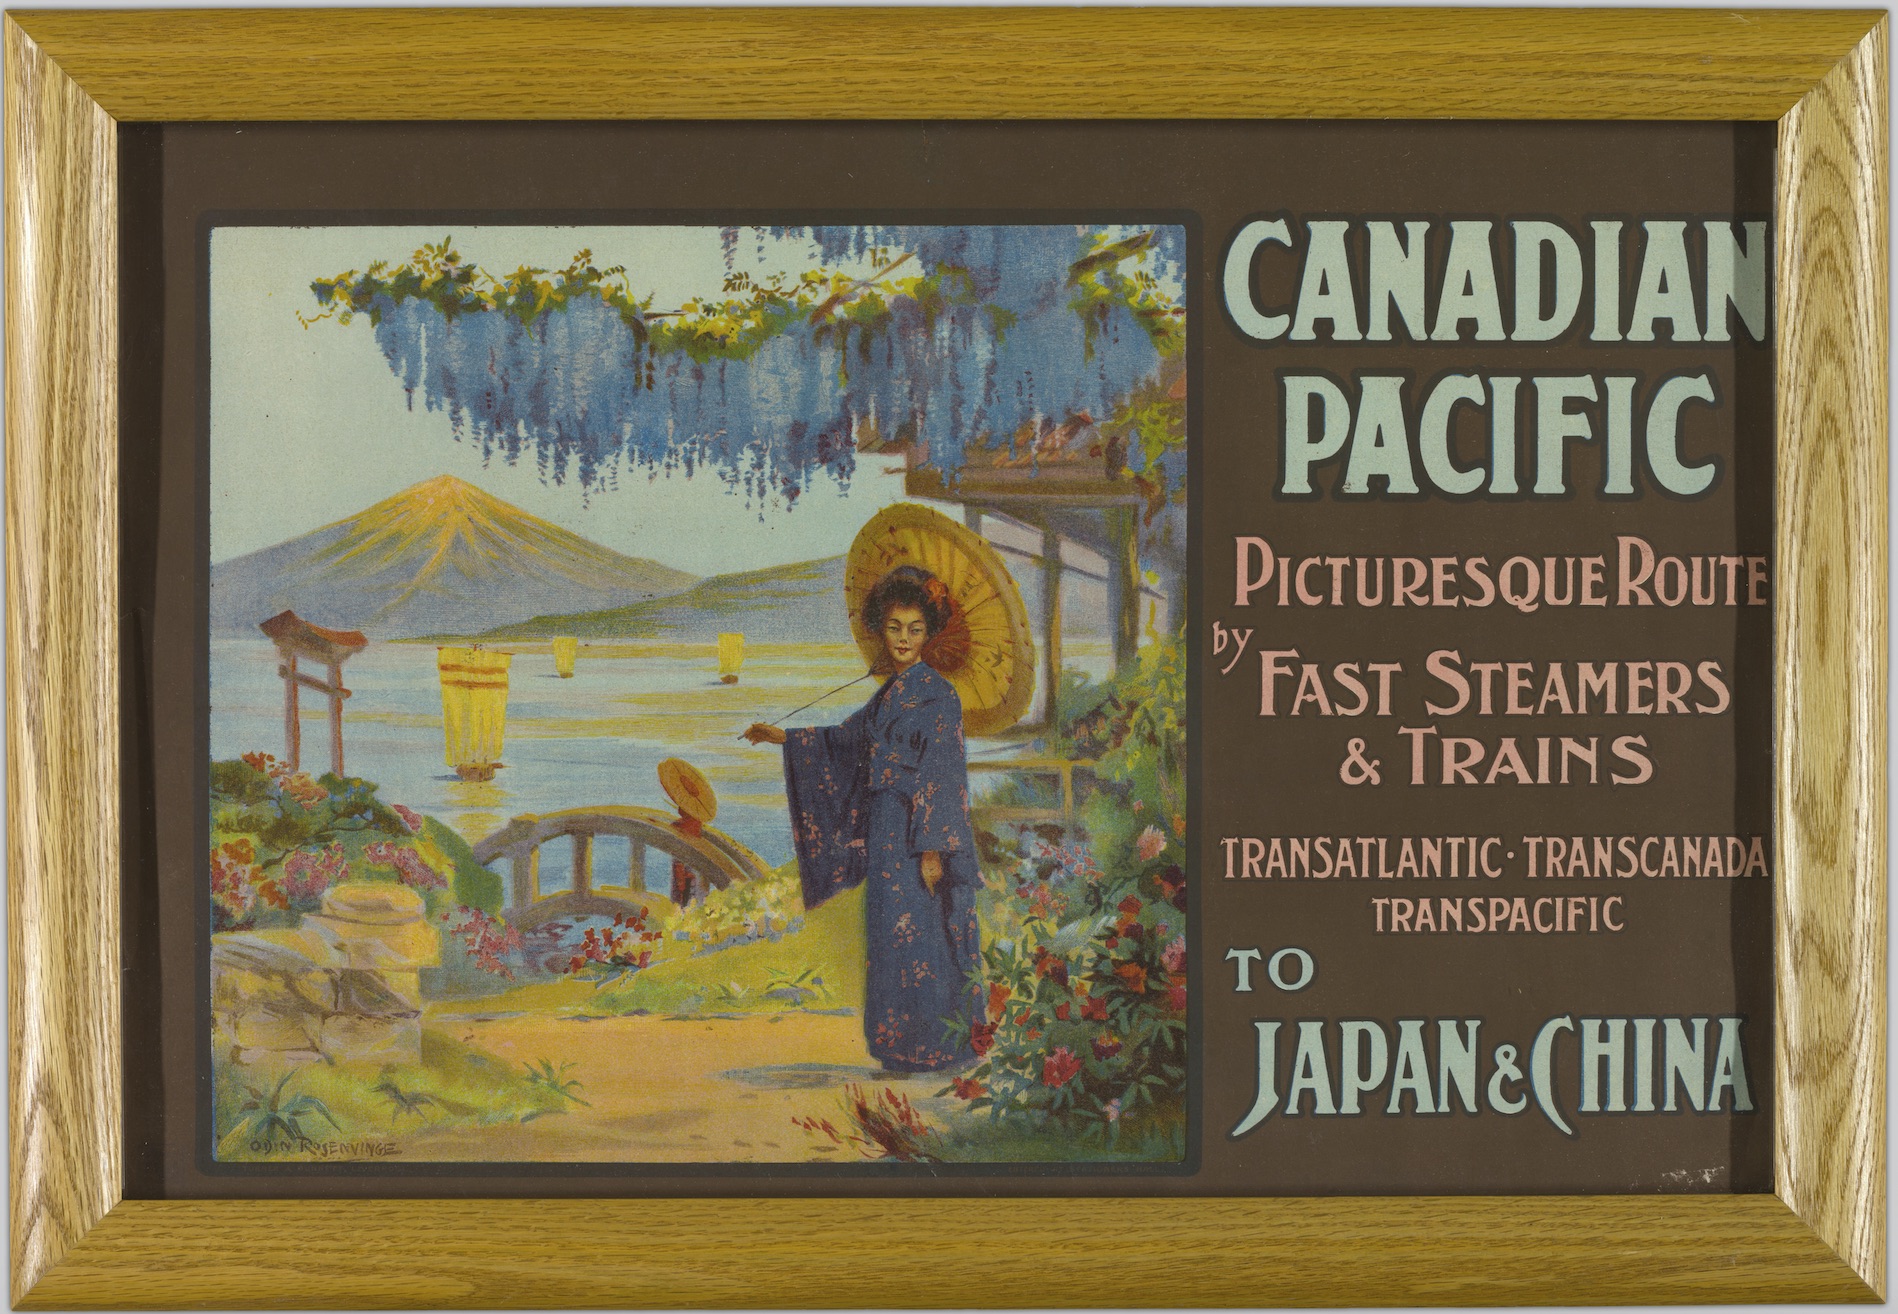 A framed, illustrated advertisement for Canadian Pacific Railroad promoting passenger train routes to Japan and China. The illustration is a simplified version of contemporary Japanese illustrations and reflects North Americans' "exoticization" of the two countries.